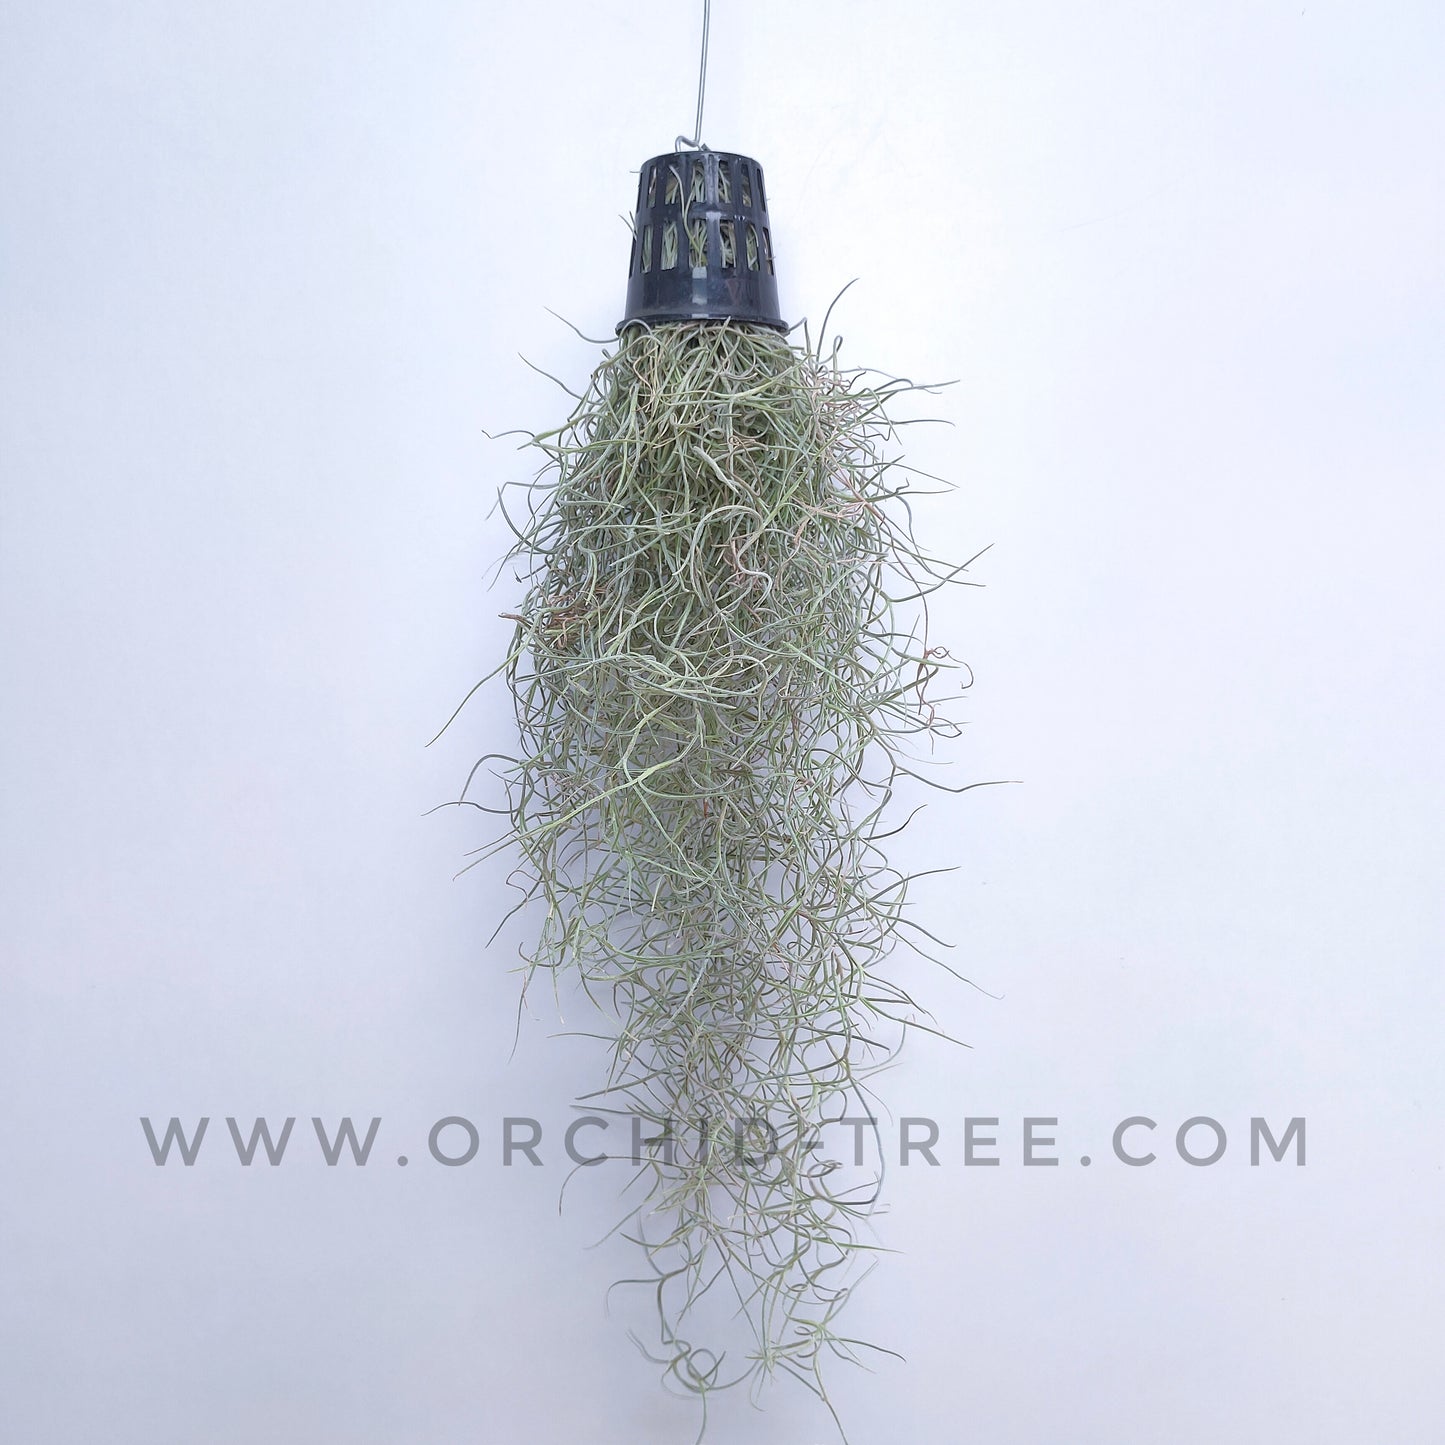 Spanish Moss (Tillandsia usneoides) - Buy Orchids Plants Online by Orchid-Tree.com